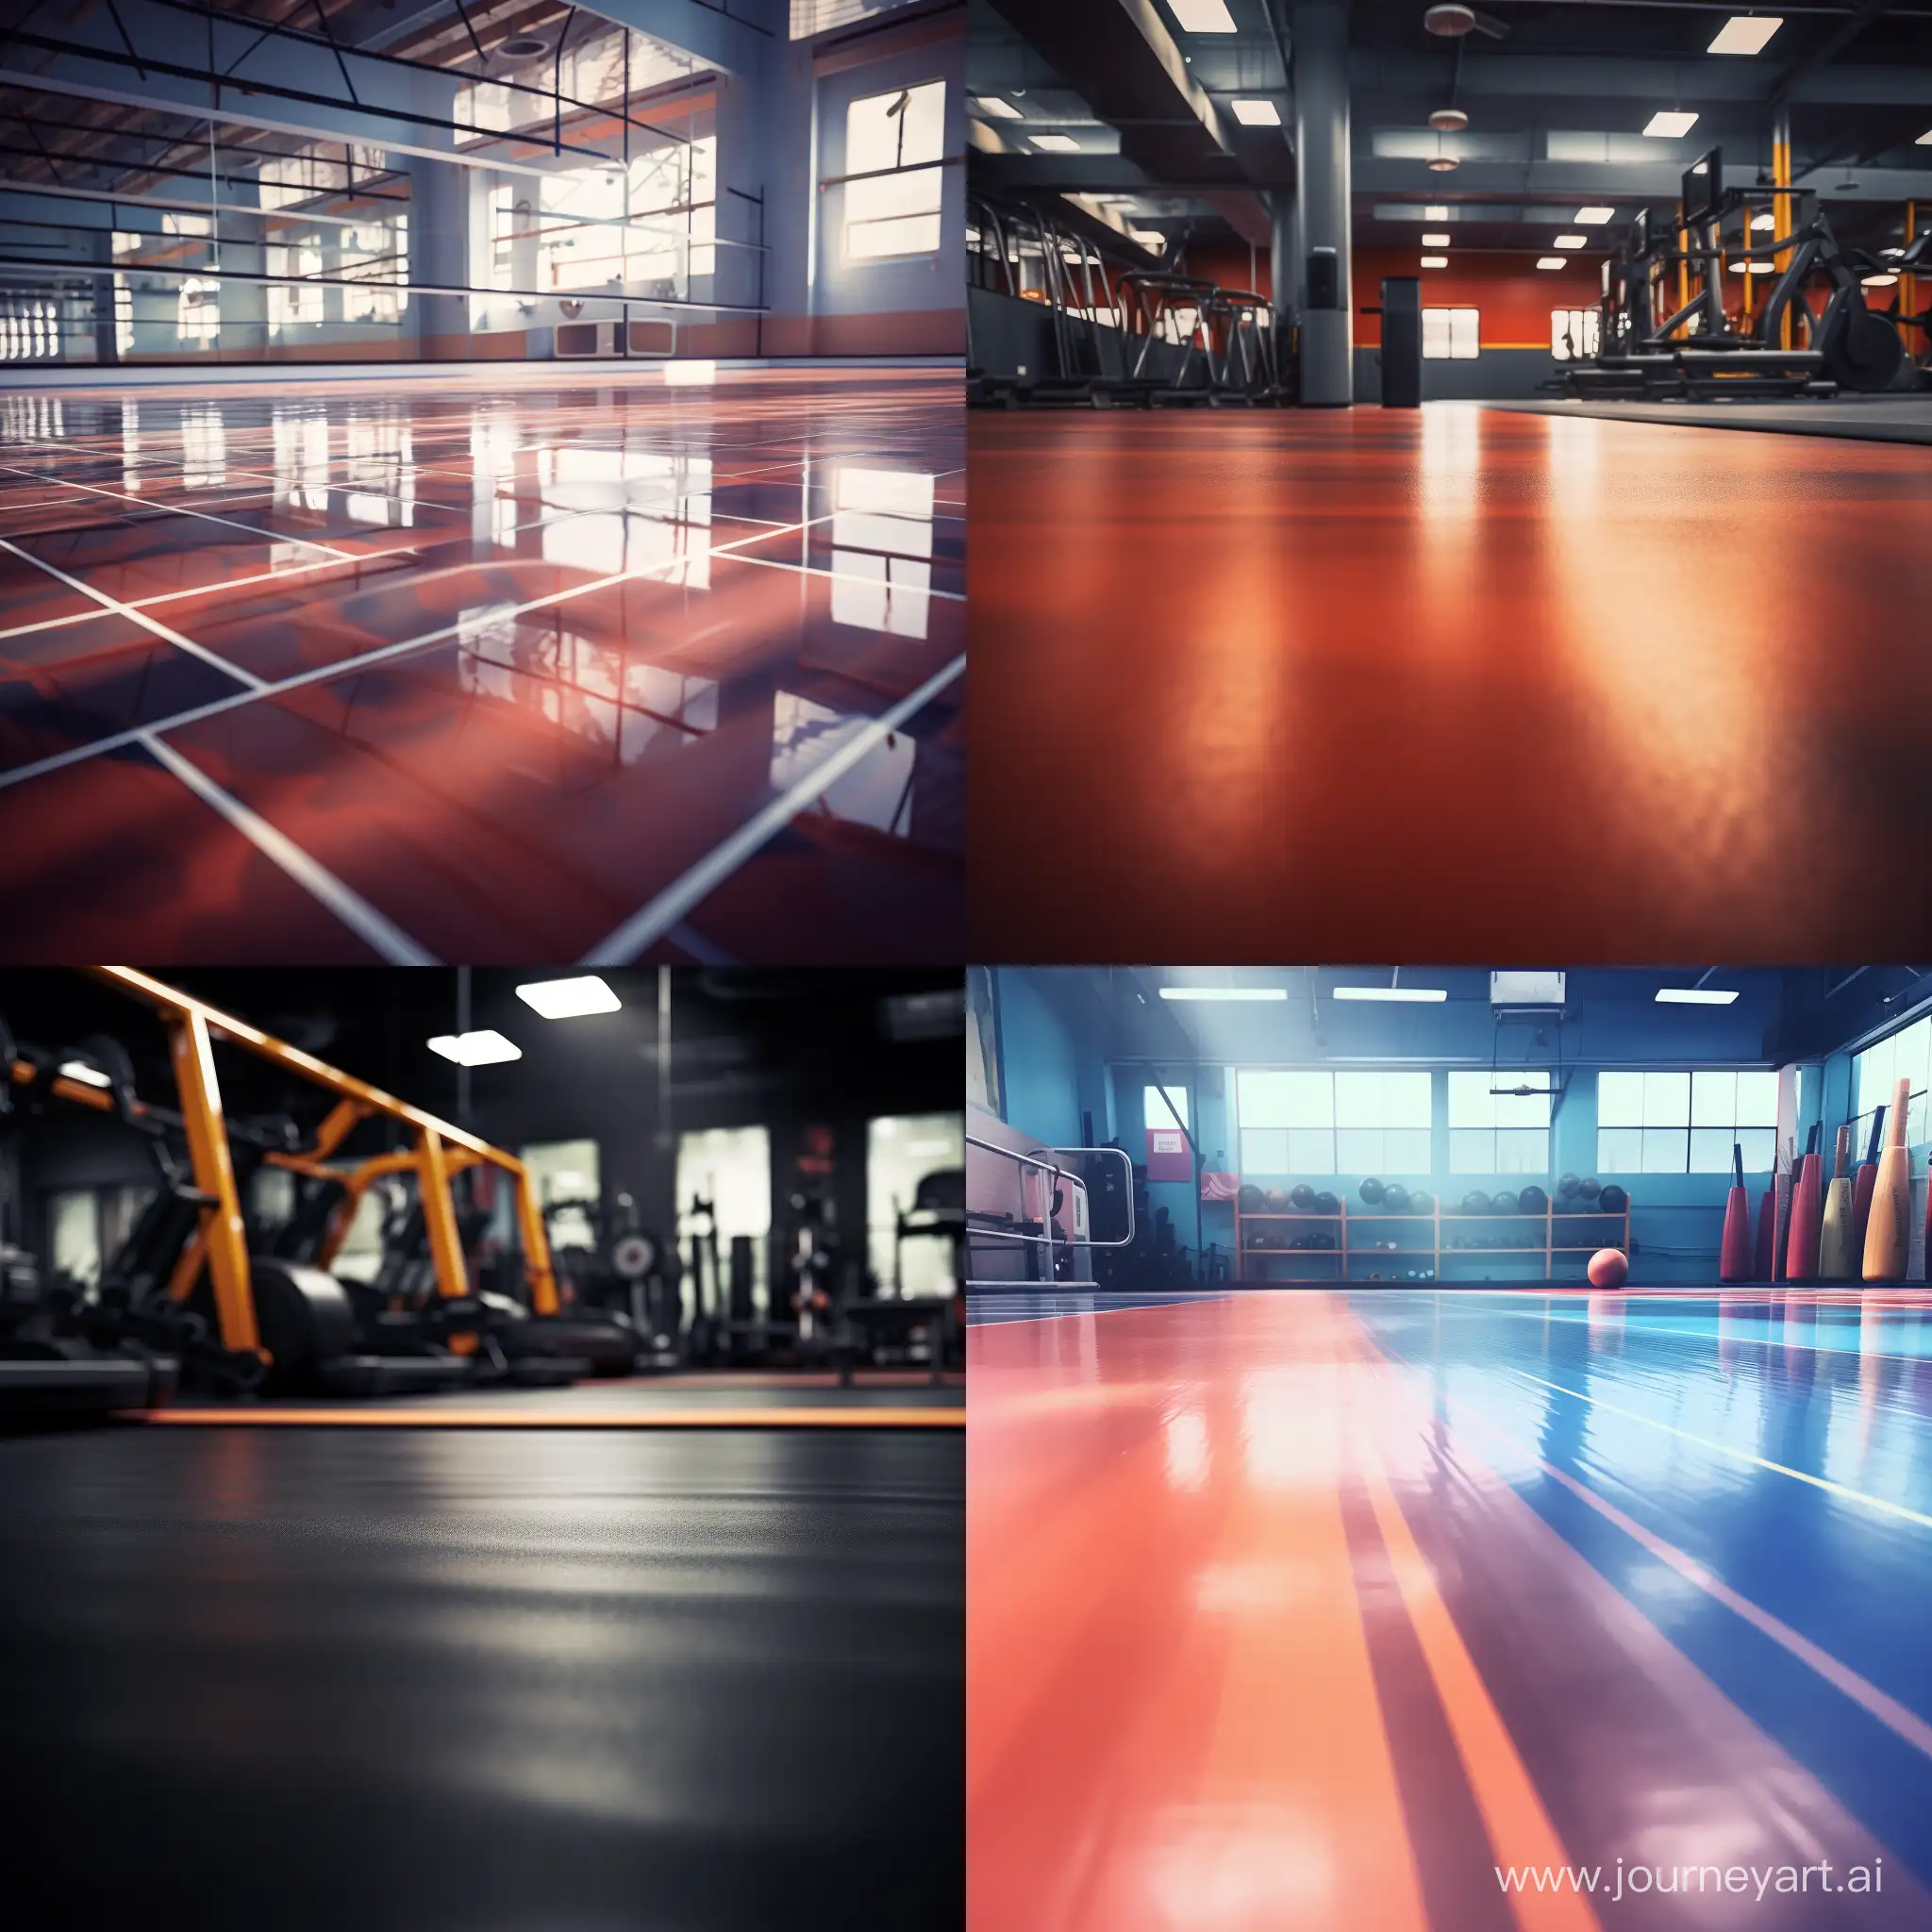 Dynamic-Gym-Rubber-Flooring-with-Blurred-Perspective